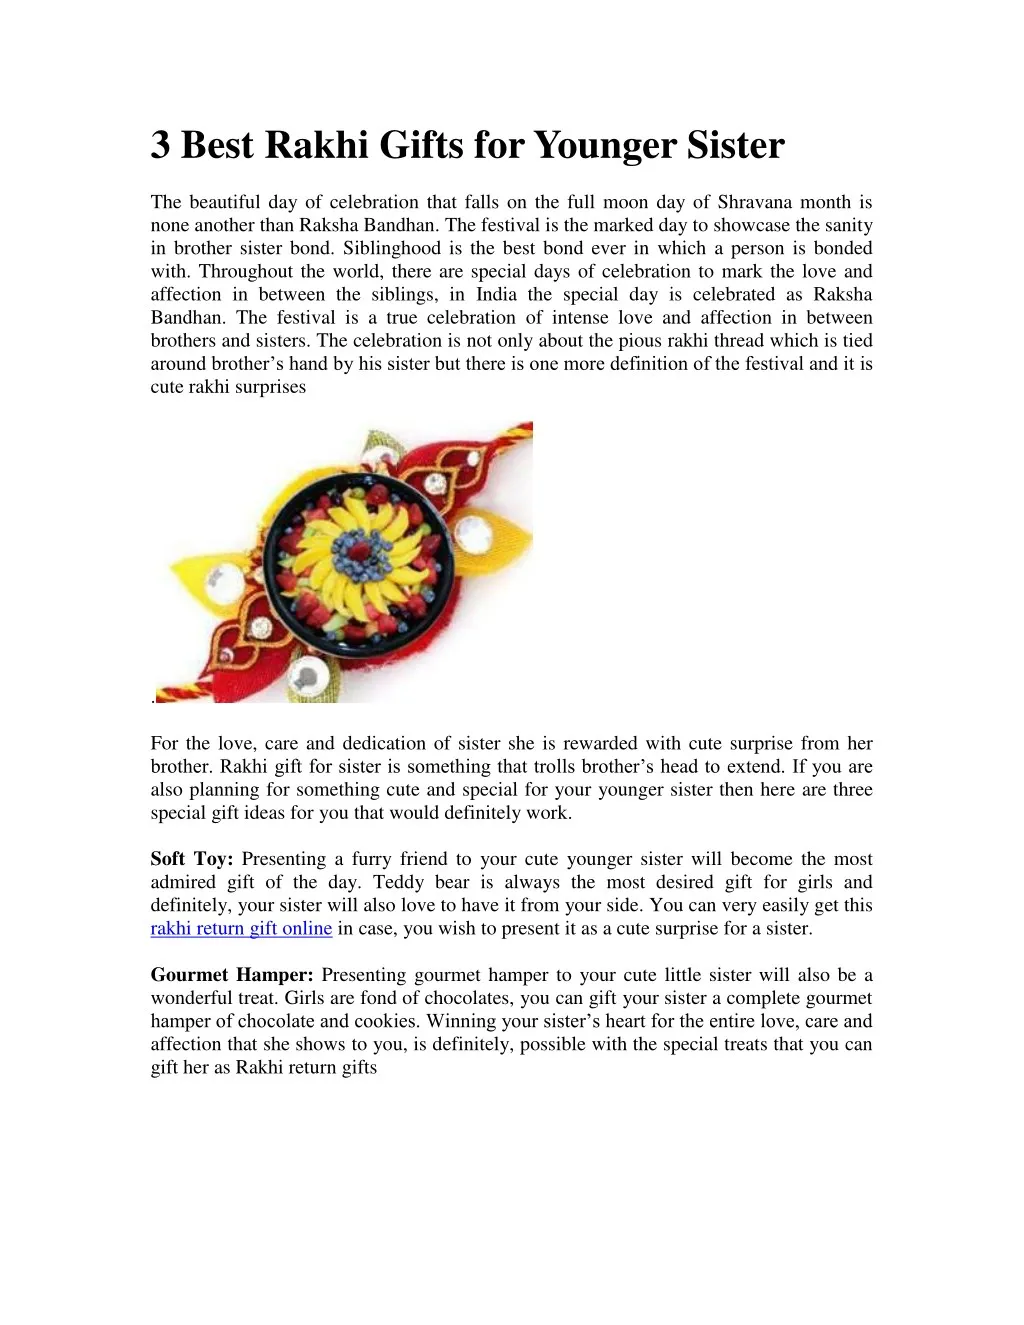 Kitchenware Delights for Your Scholar Sis: Rakhi Gifts Idea for Your S